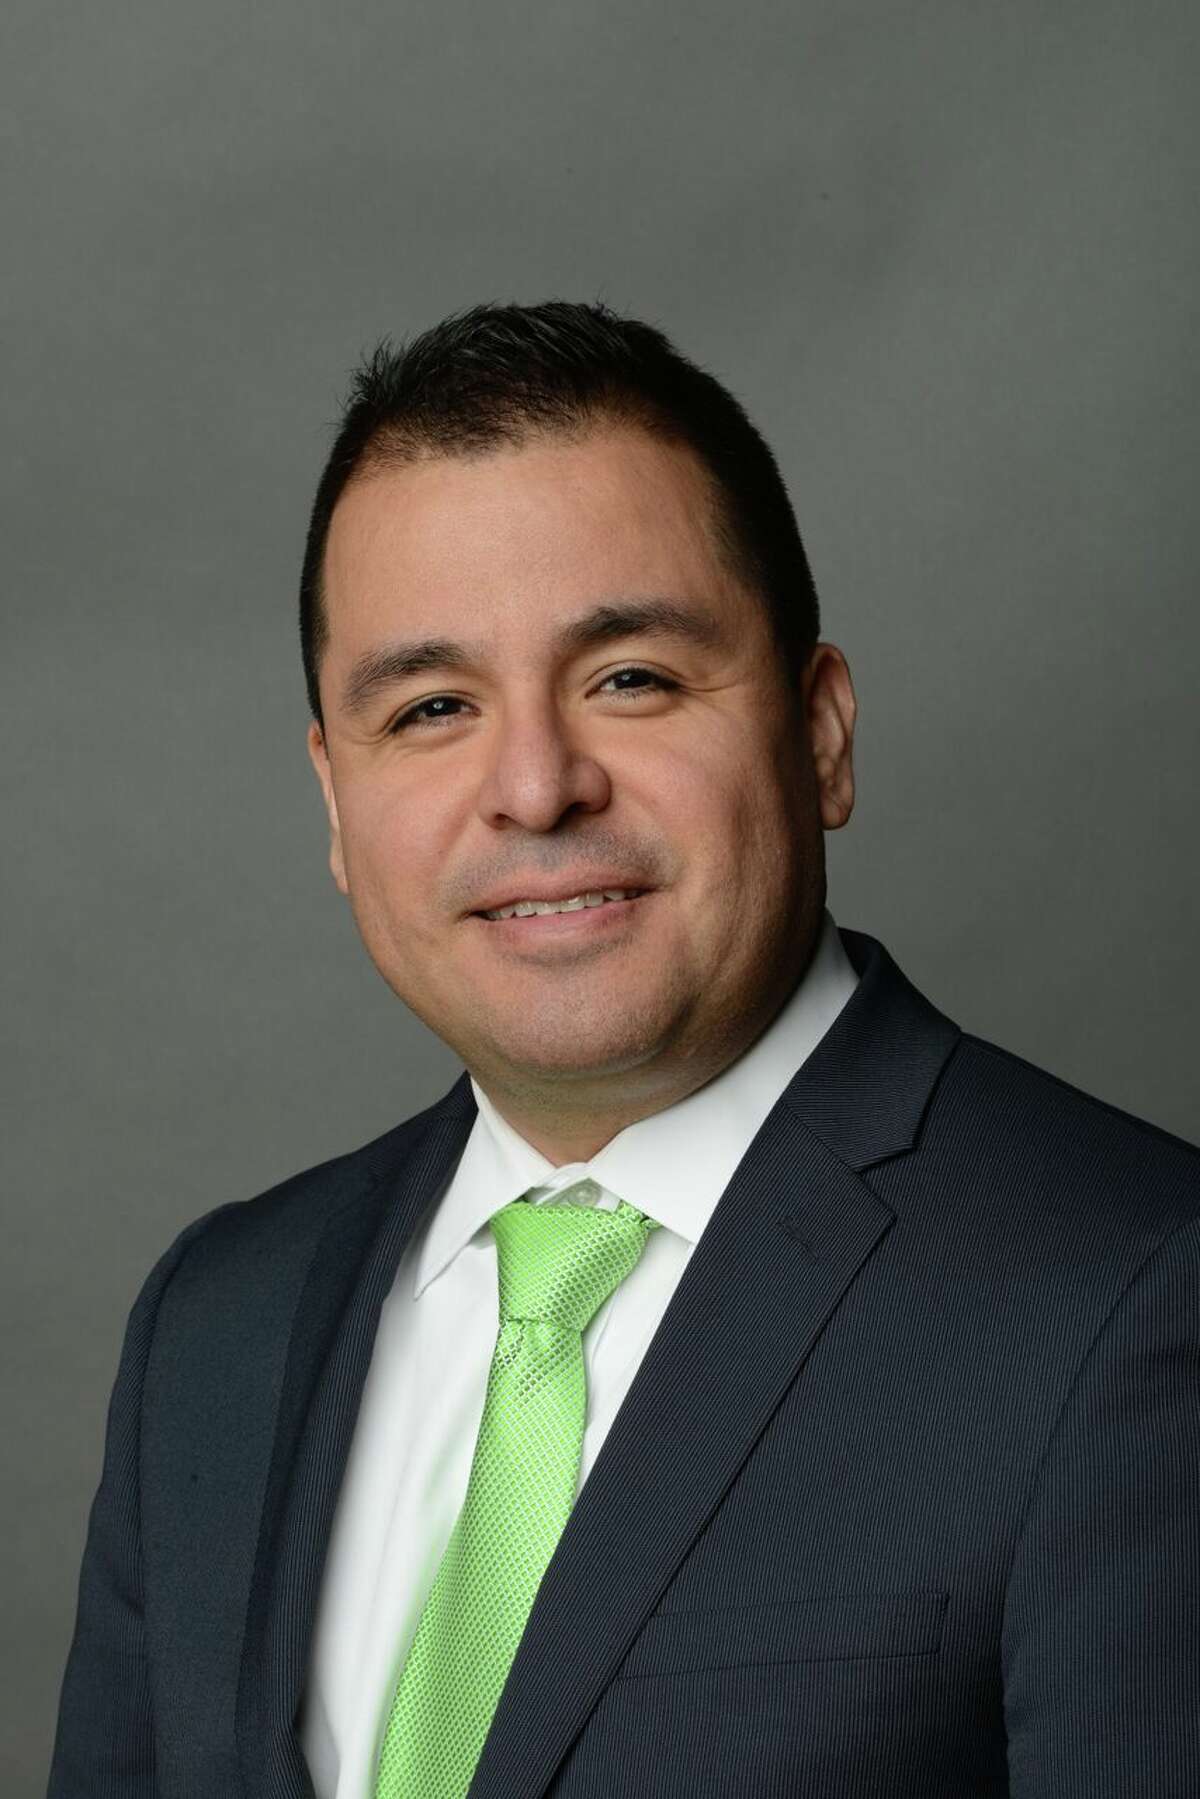 Frank Rodriguez, principal of K.T. Murphy Elementary School, was appointed the first principal of the the Rogers Magnet School Expansion on Tuesday.